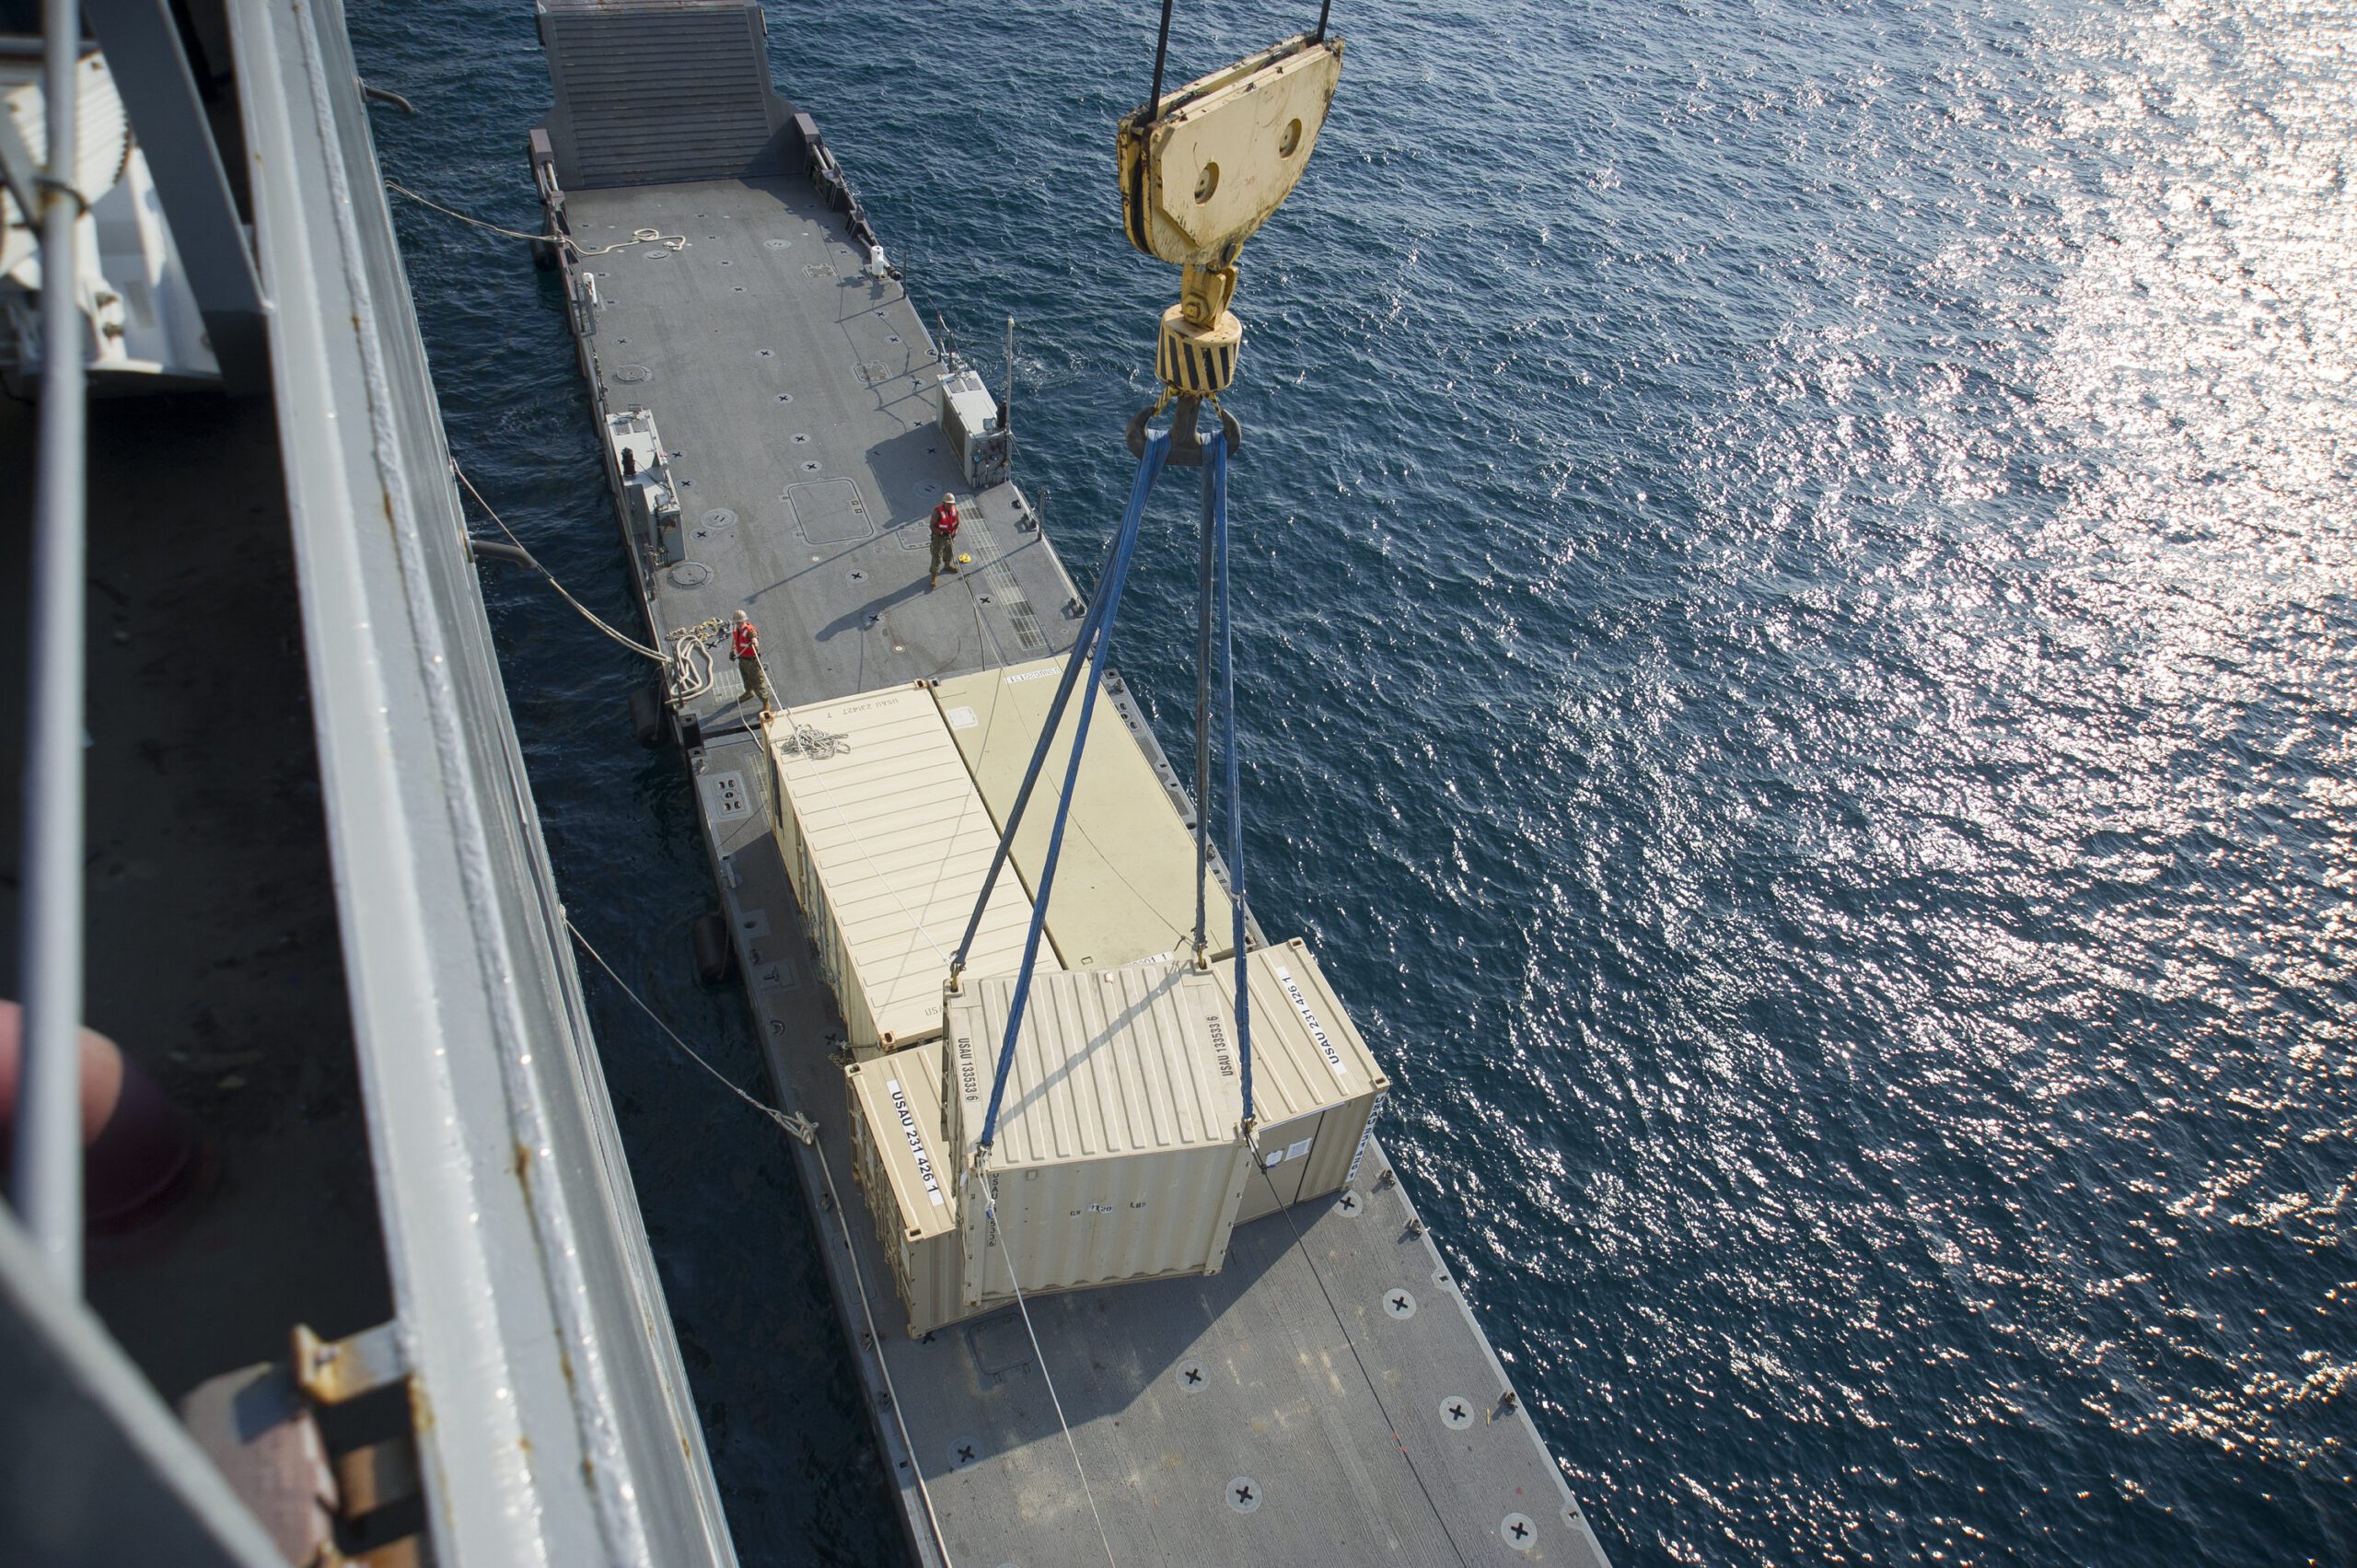 US Navy photo of Joint Logistics Over the Shore (JLOTS) barge